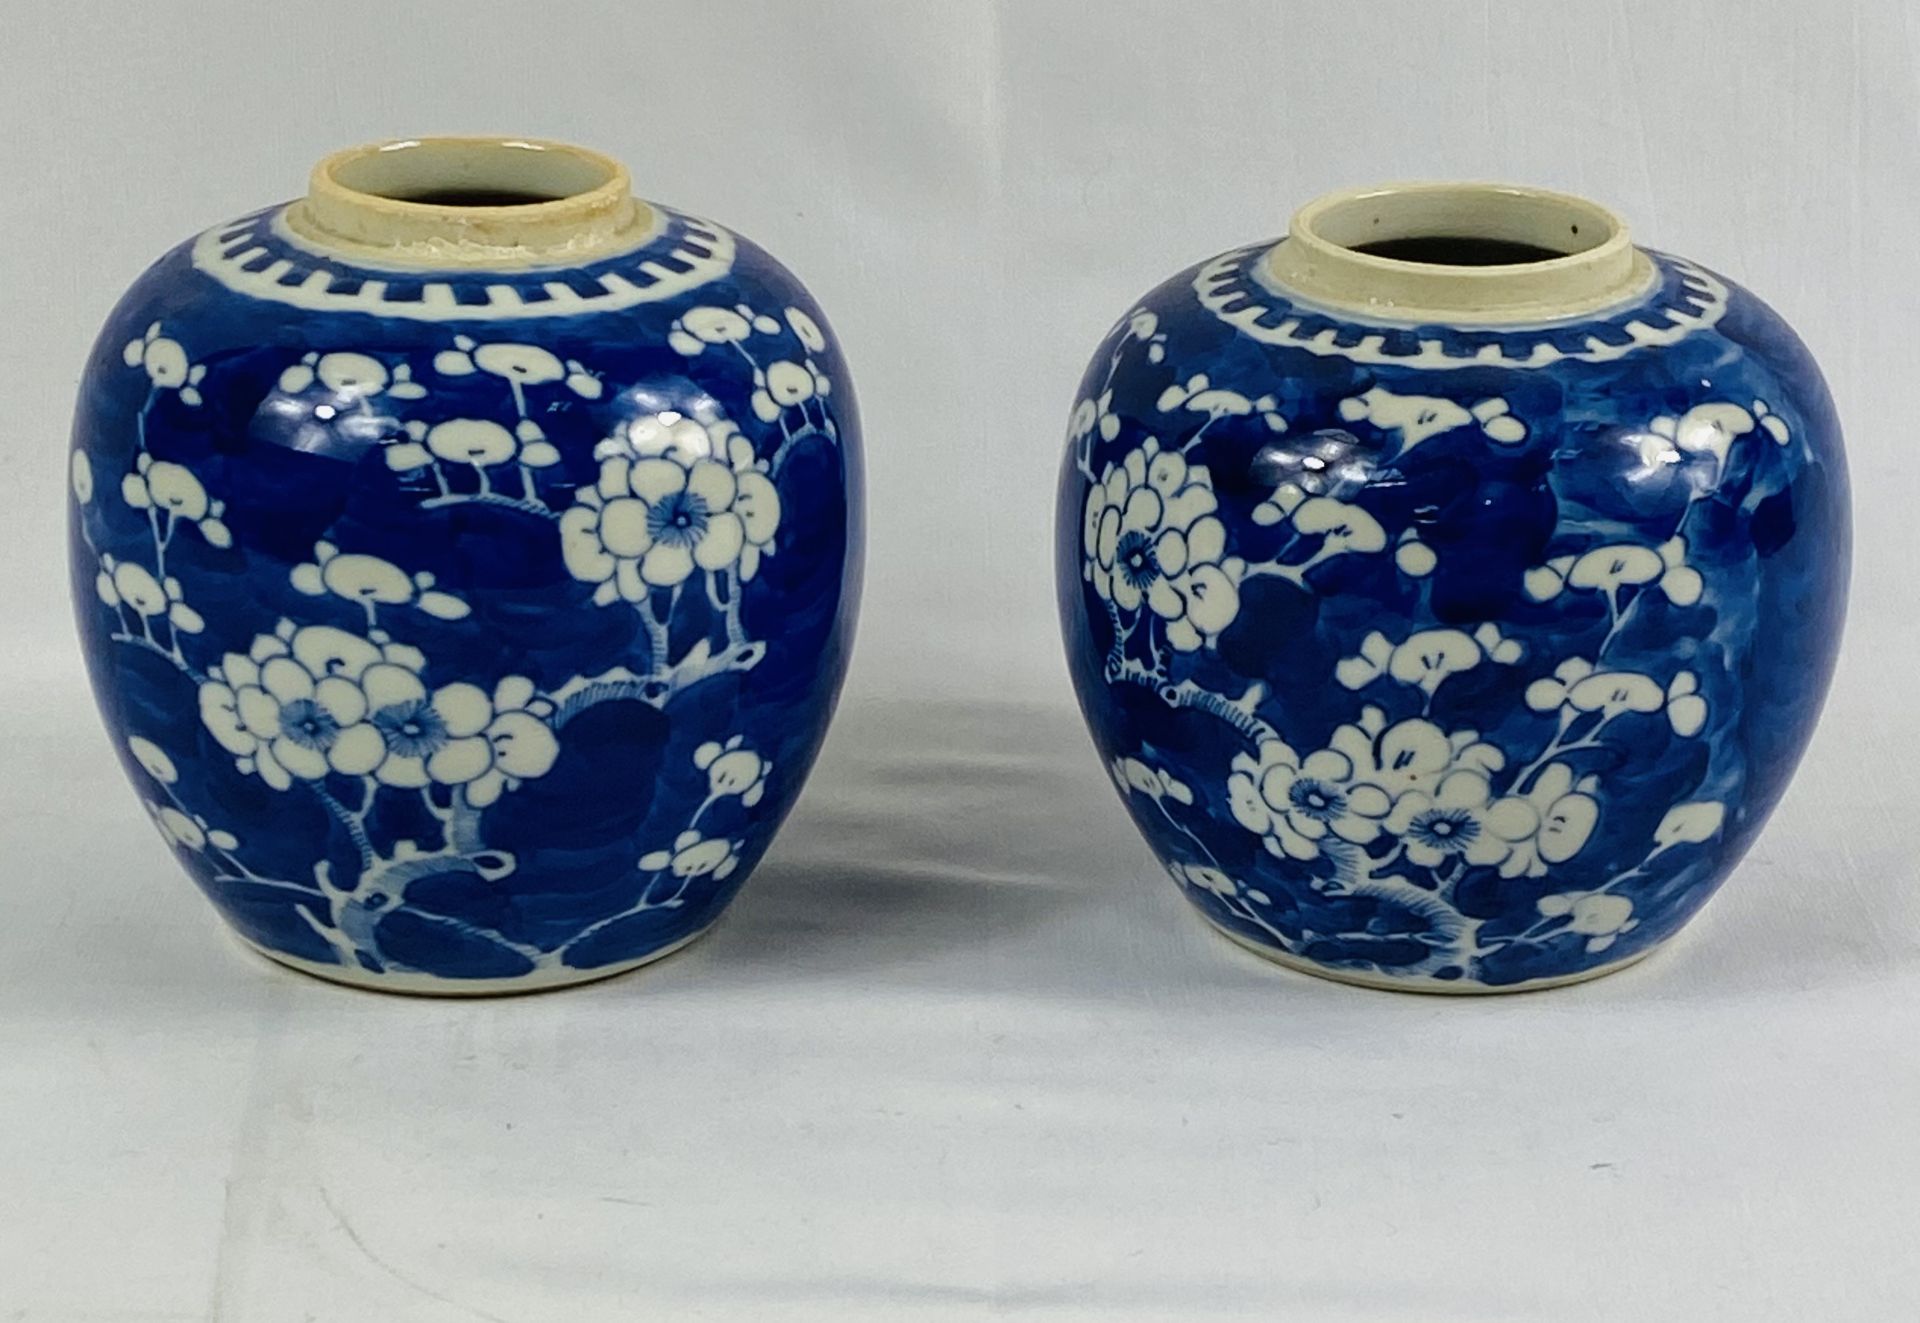 Two blue and white ginger jars